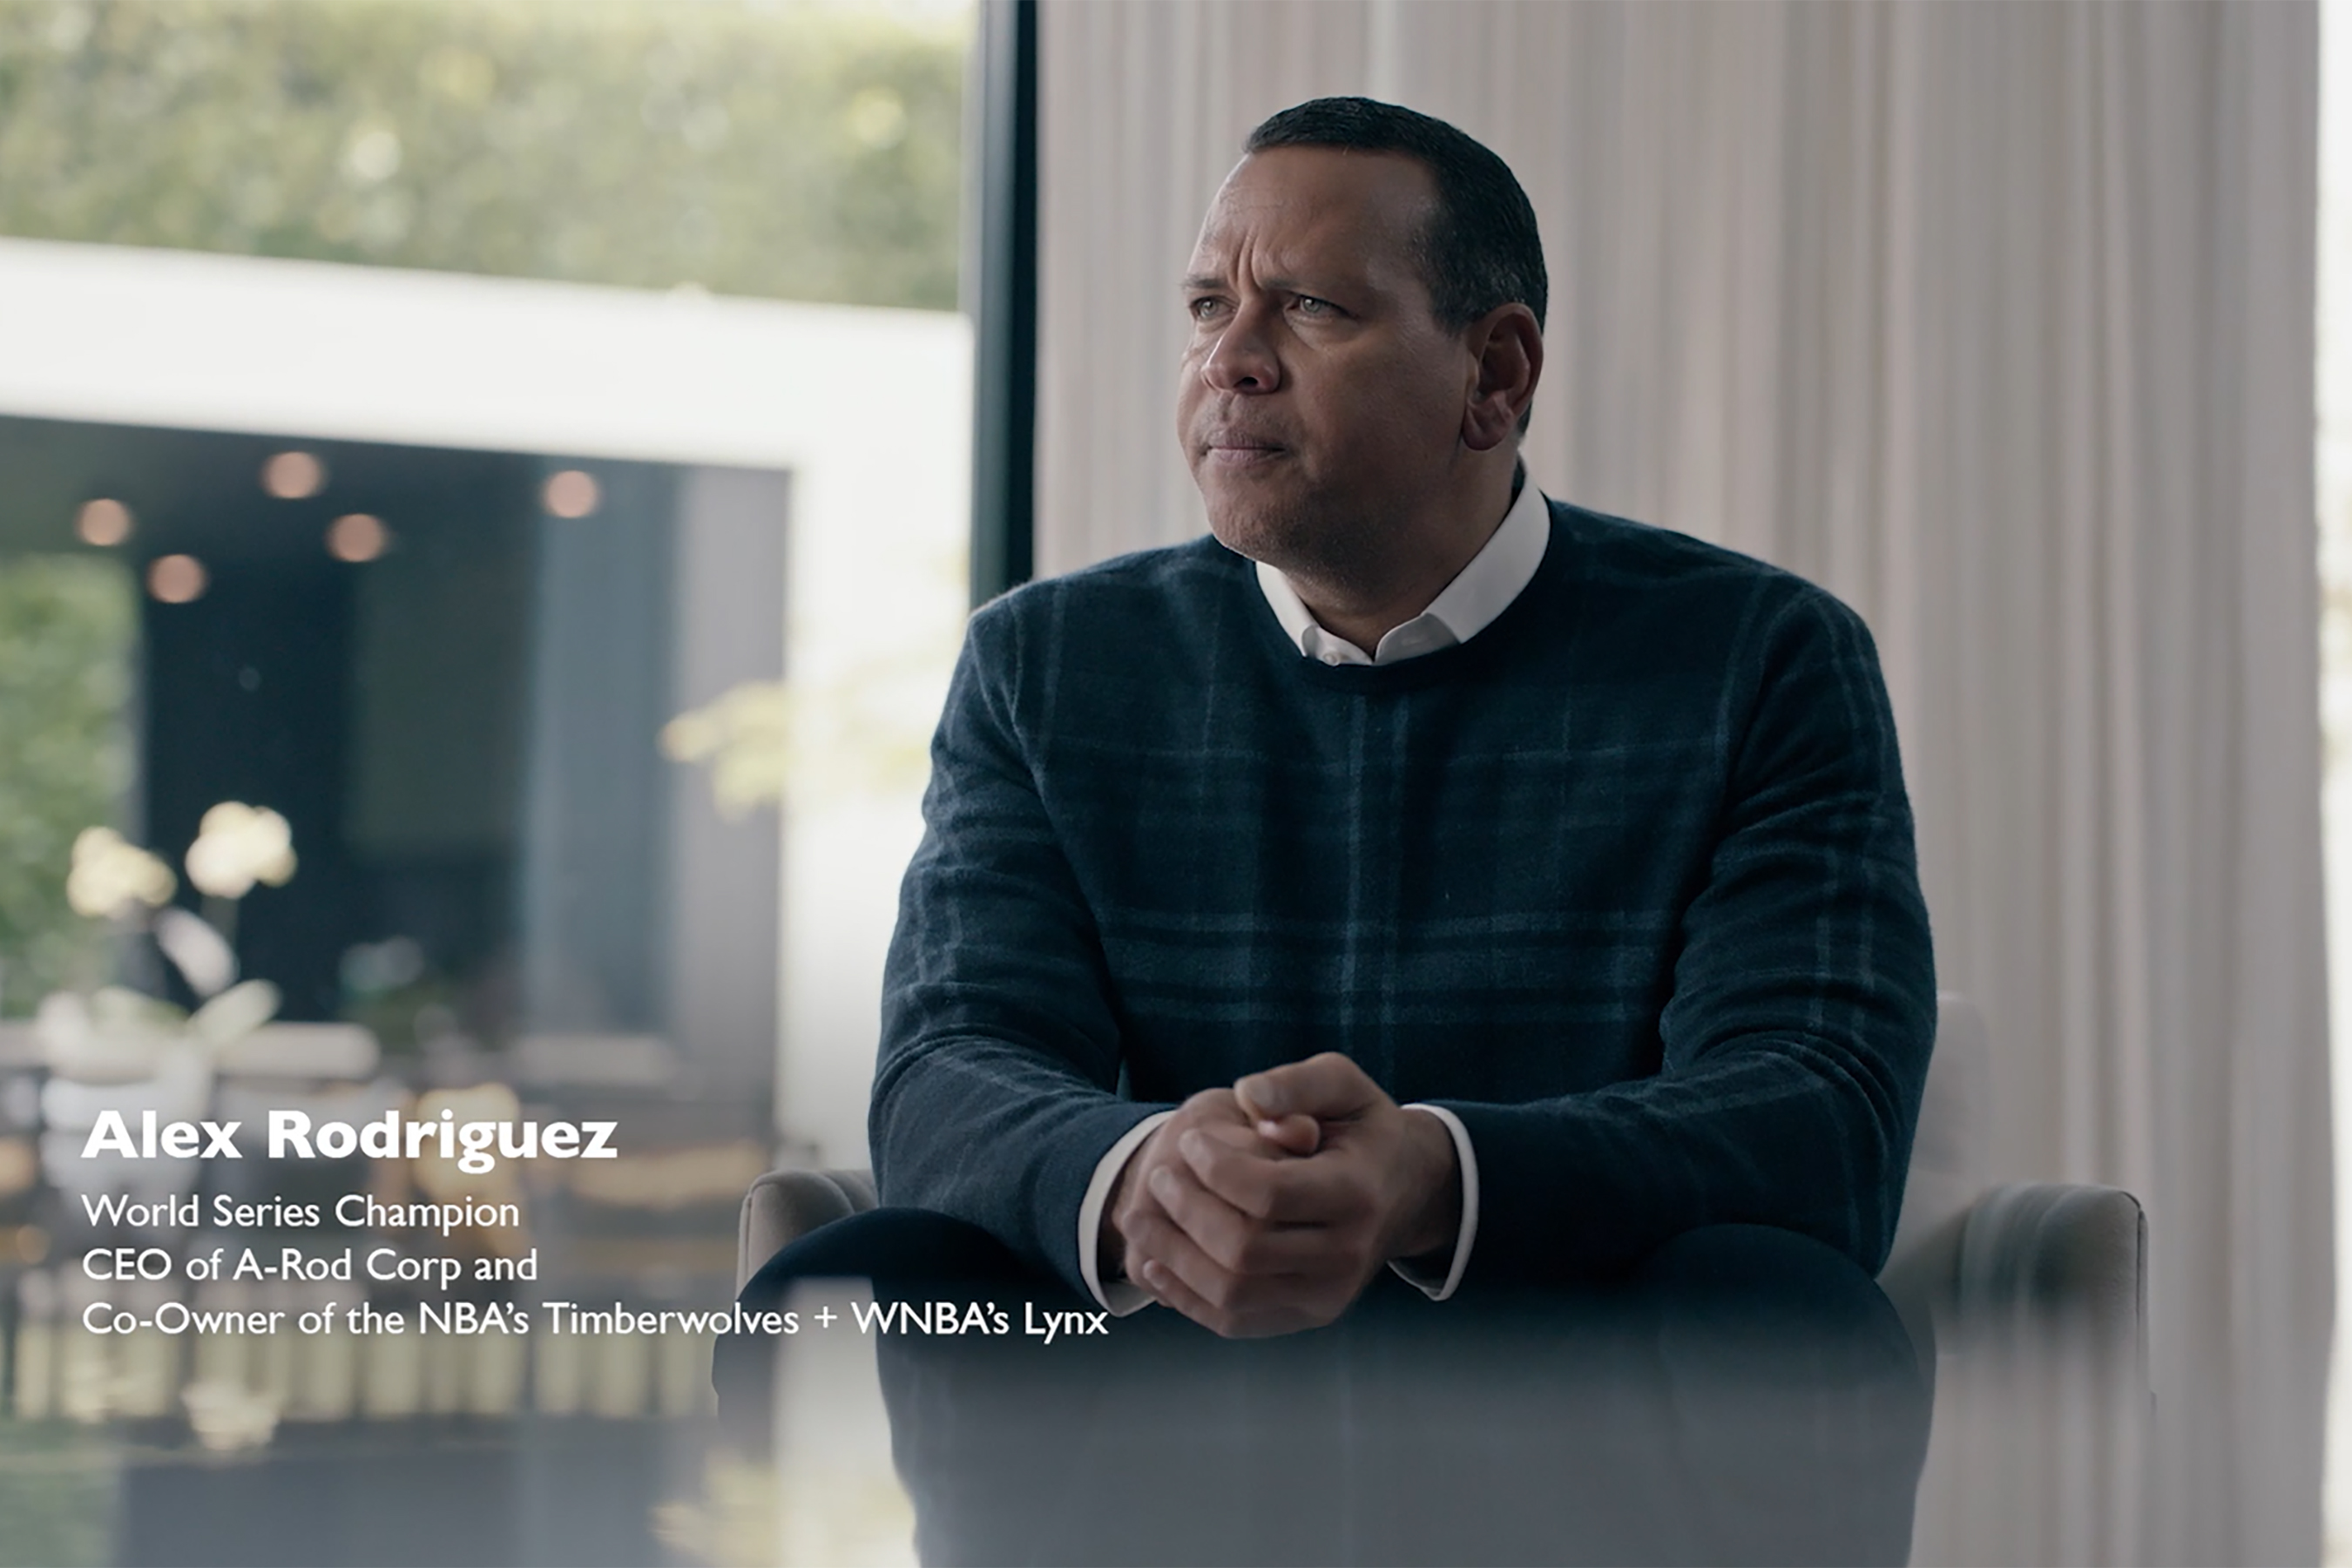 OraPharma and Alex Rodriguez Team Up to Raise Awareness About the Importance of Managing Gum Disease